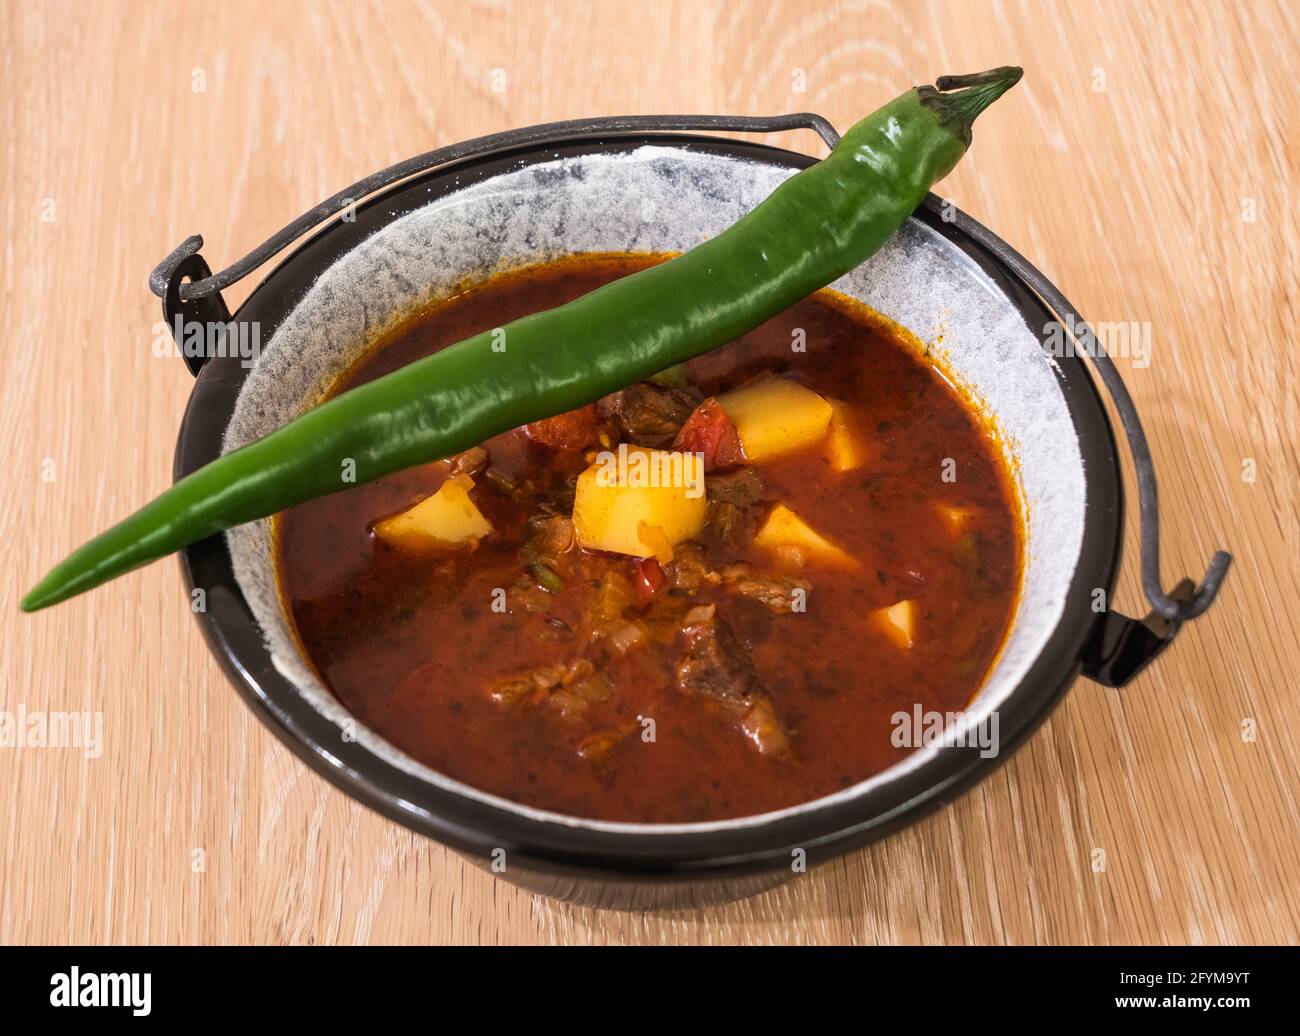 Hungarian Beef Goulash or Gulyas Soup or Stew Served in a Small Cauldron with Potatoes, Meat, Paprika and Green Chili Pepper Stock Photo